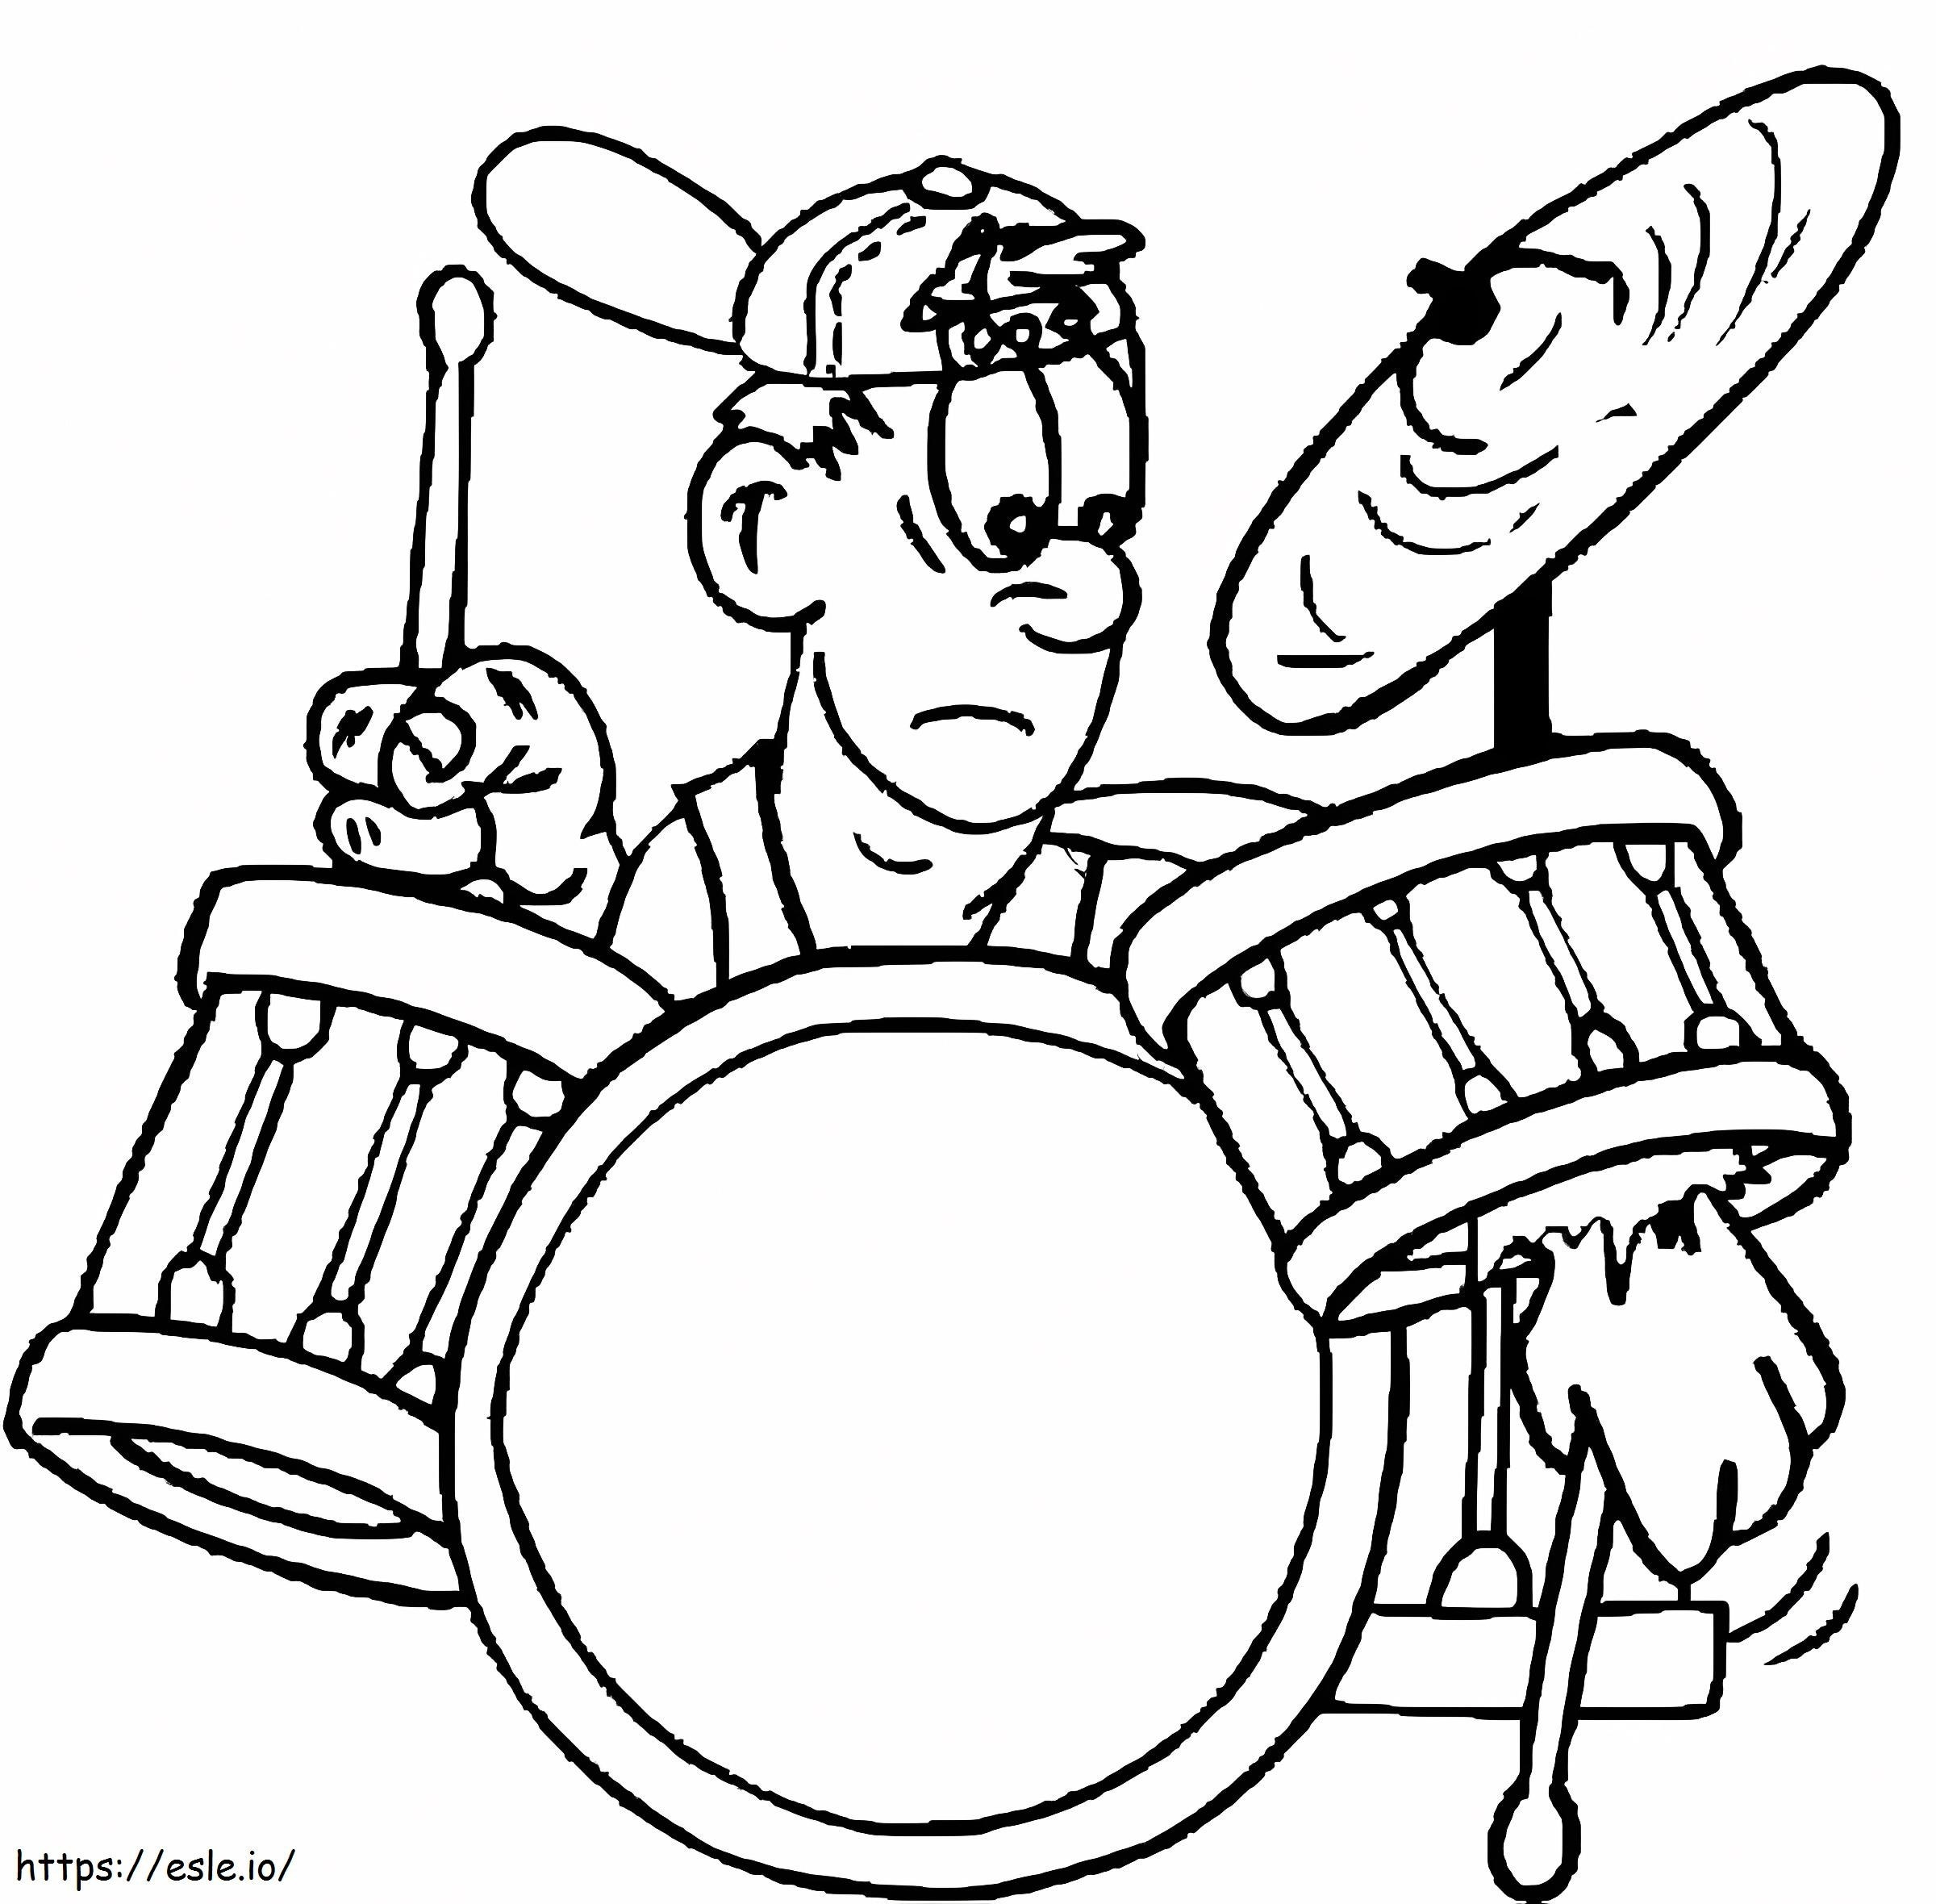 Drummer Playing The Drum coloring page